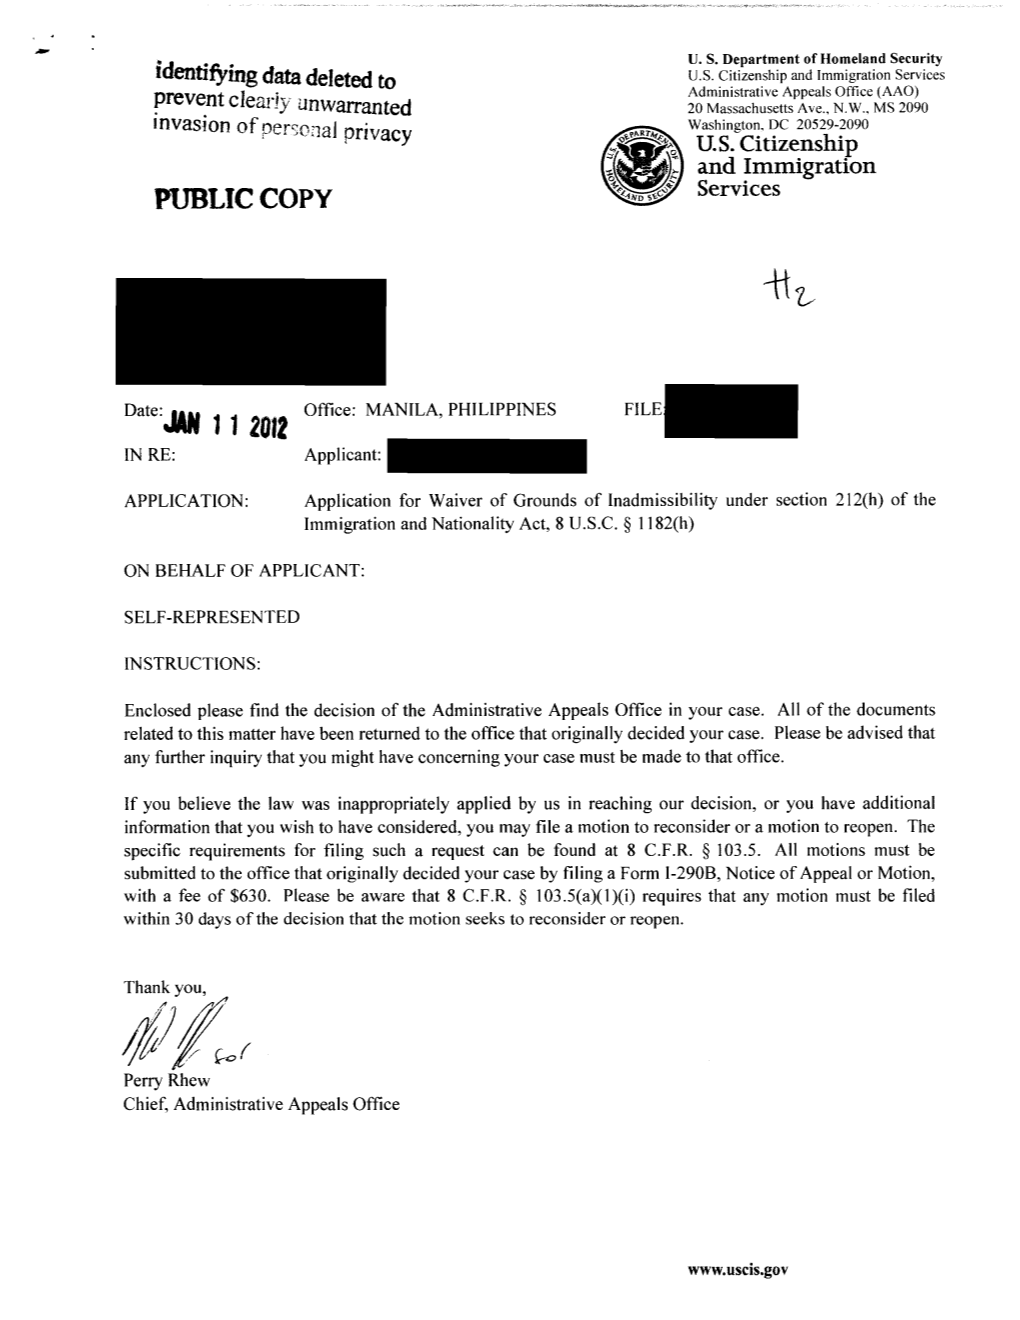 Tment of Homeland Security Identifying Data Deleted to U.S